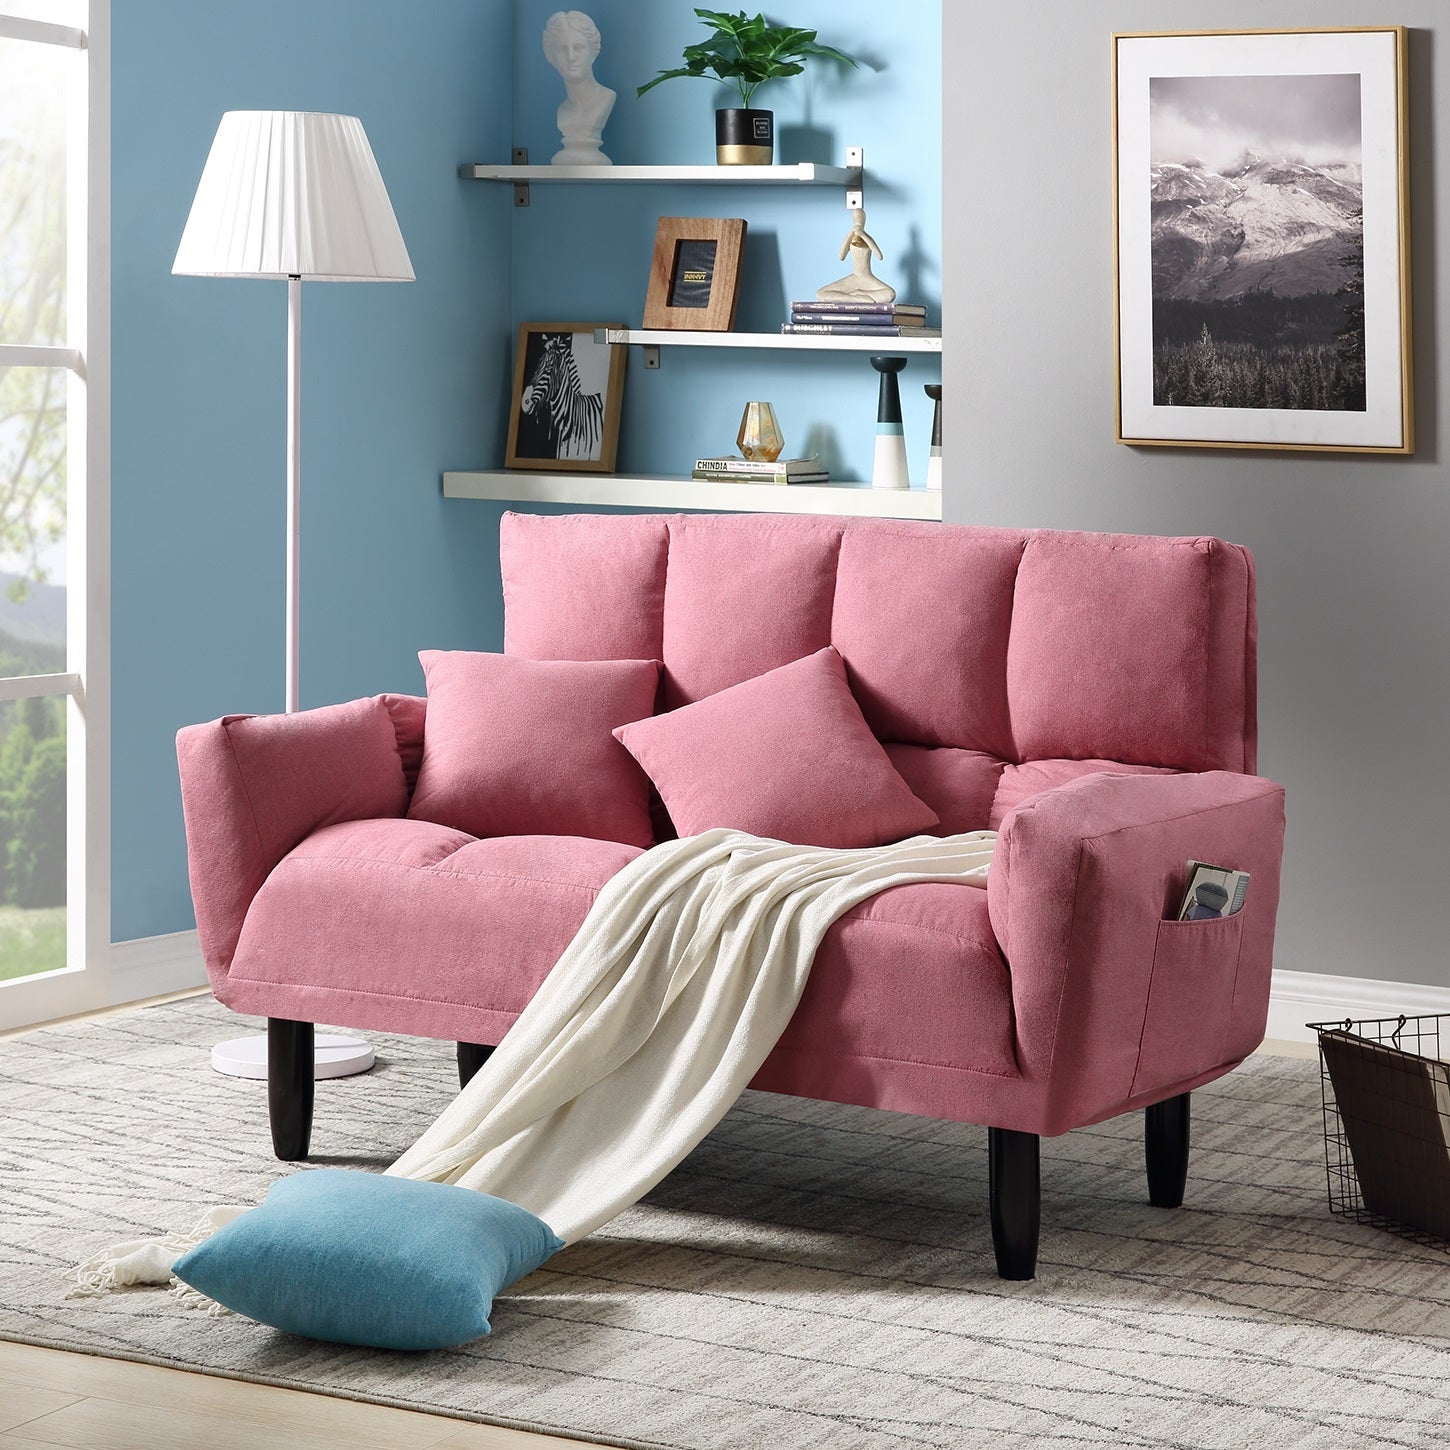 Modern Round Arm Tufted Sleeper Sofa with Solid Wood Legs